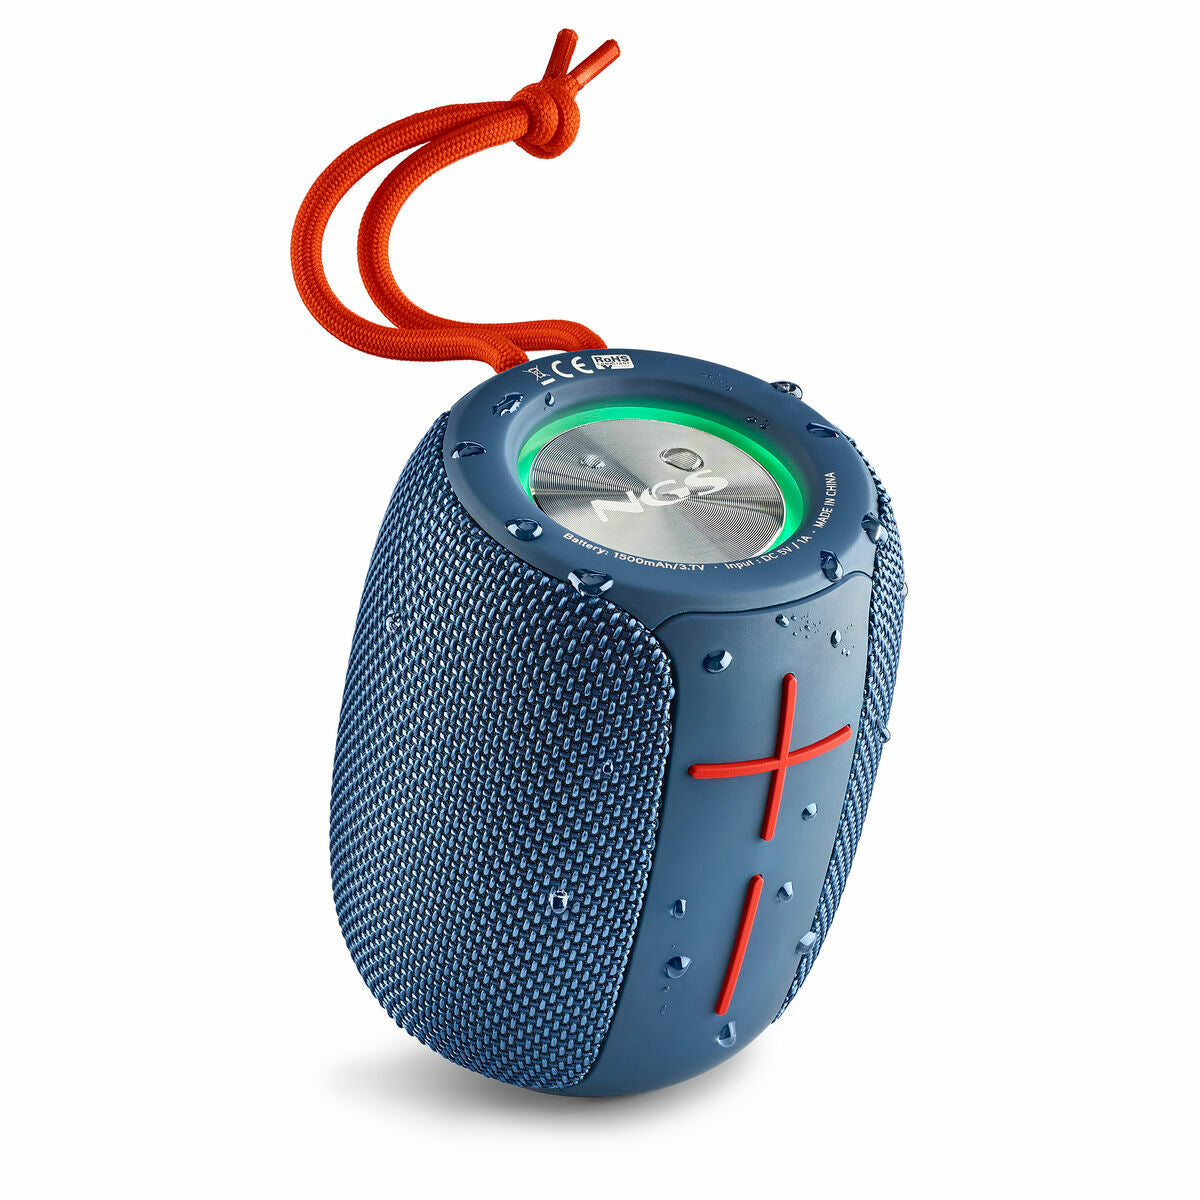 Portable Bluetooth Speakers NGS Roller Nitro 1 Blue, NGS, Electronics, Mobile communication and accessories, portable-bluetooth-speakers-ngs-roller-nitro-1-blue, Brand_NGS, category-reference-2609, category-reference-2882, category-reference-2923, category-reference-t-19653, category-reference-t-21311, category-reference-t-4036, category-reference-t-4037, Condition_NEW, entertainment, music, Price_50 - 100, telephones & tablets, wifi y bluetooth, RiotNook